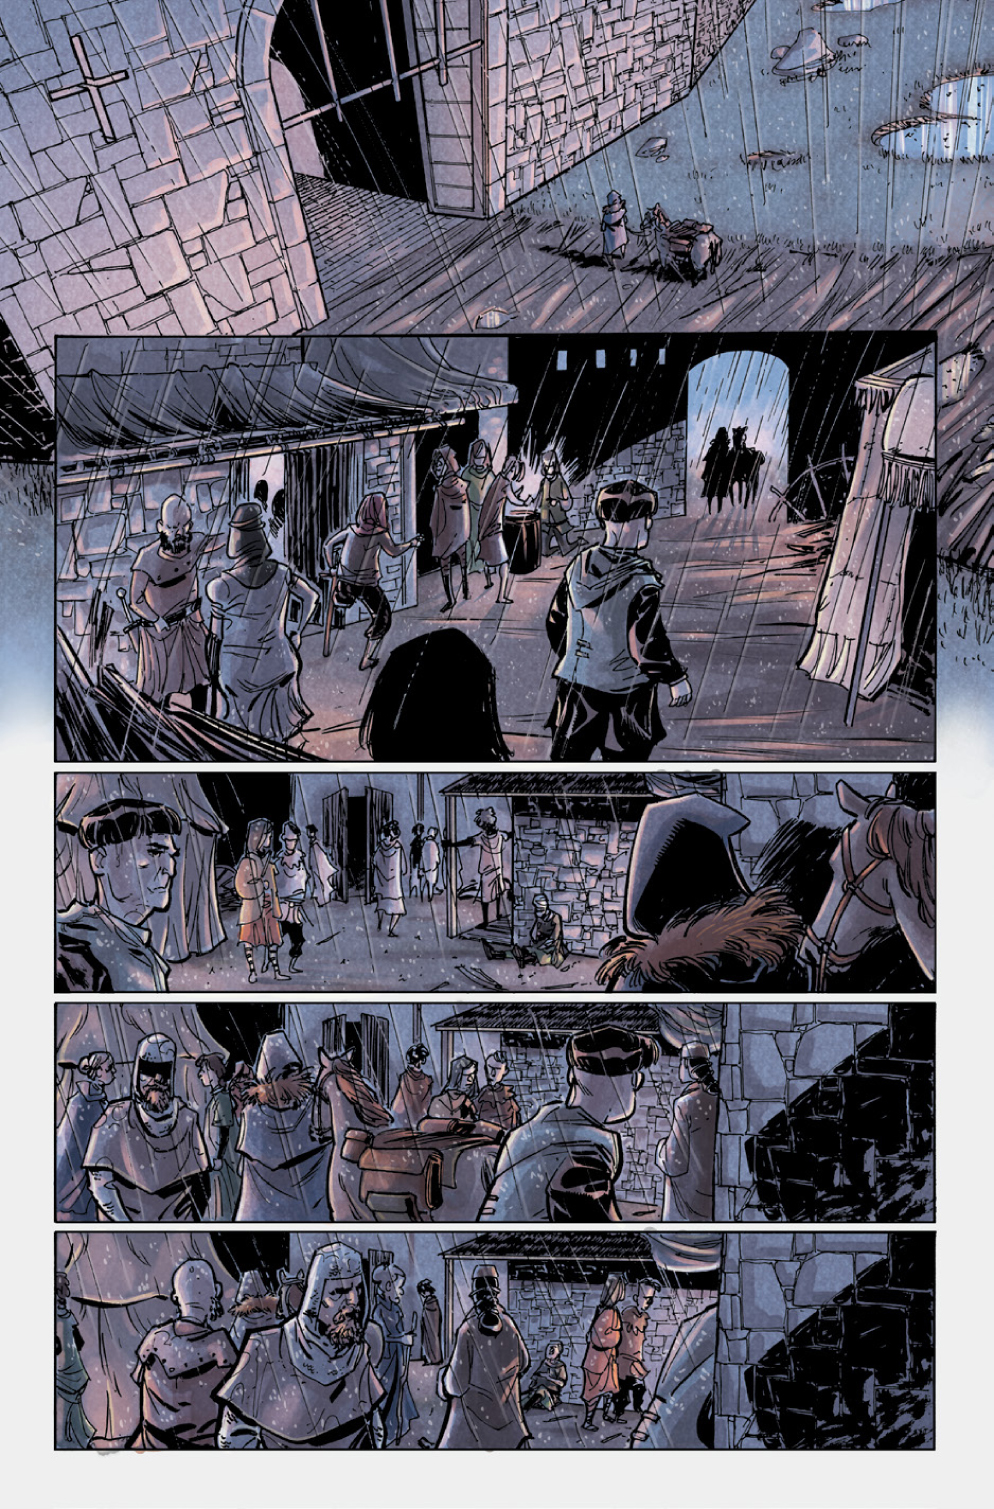 THE LAST SIEGE #1 PG 01-26 PREVIEW-7.jpg